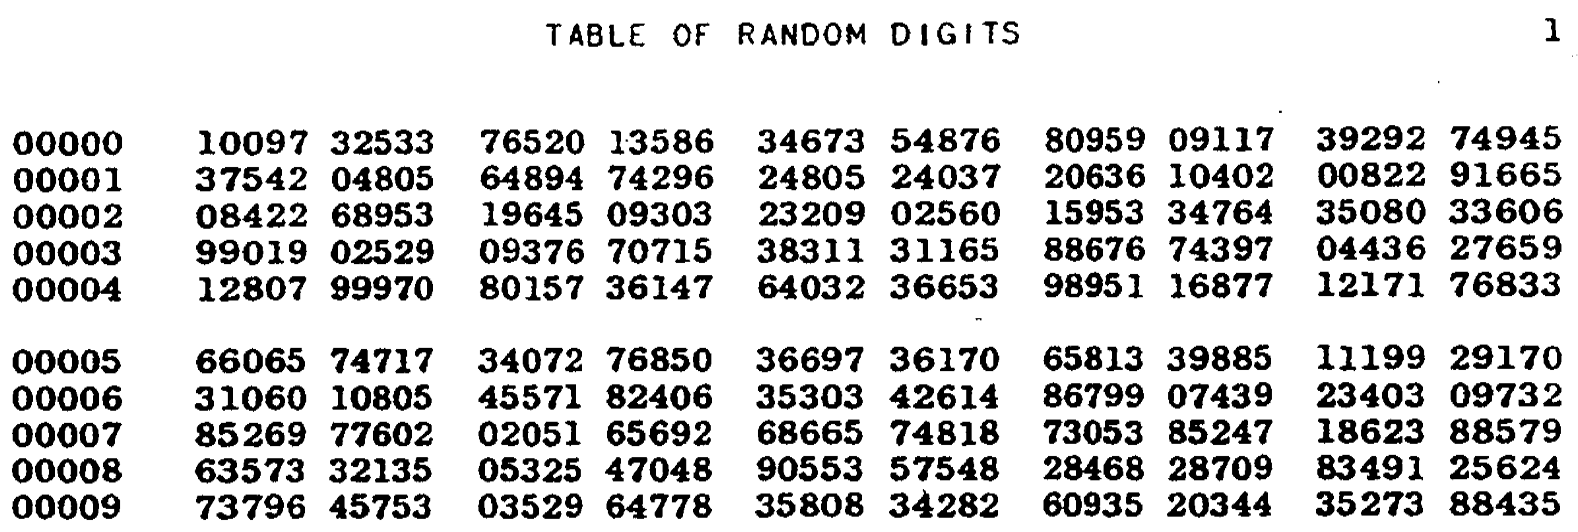 Page 1 of RAND million digit table